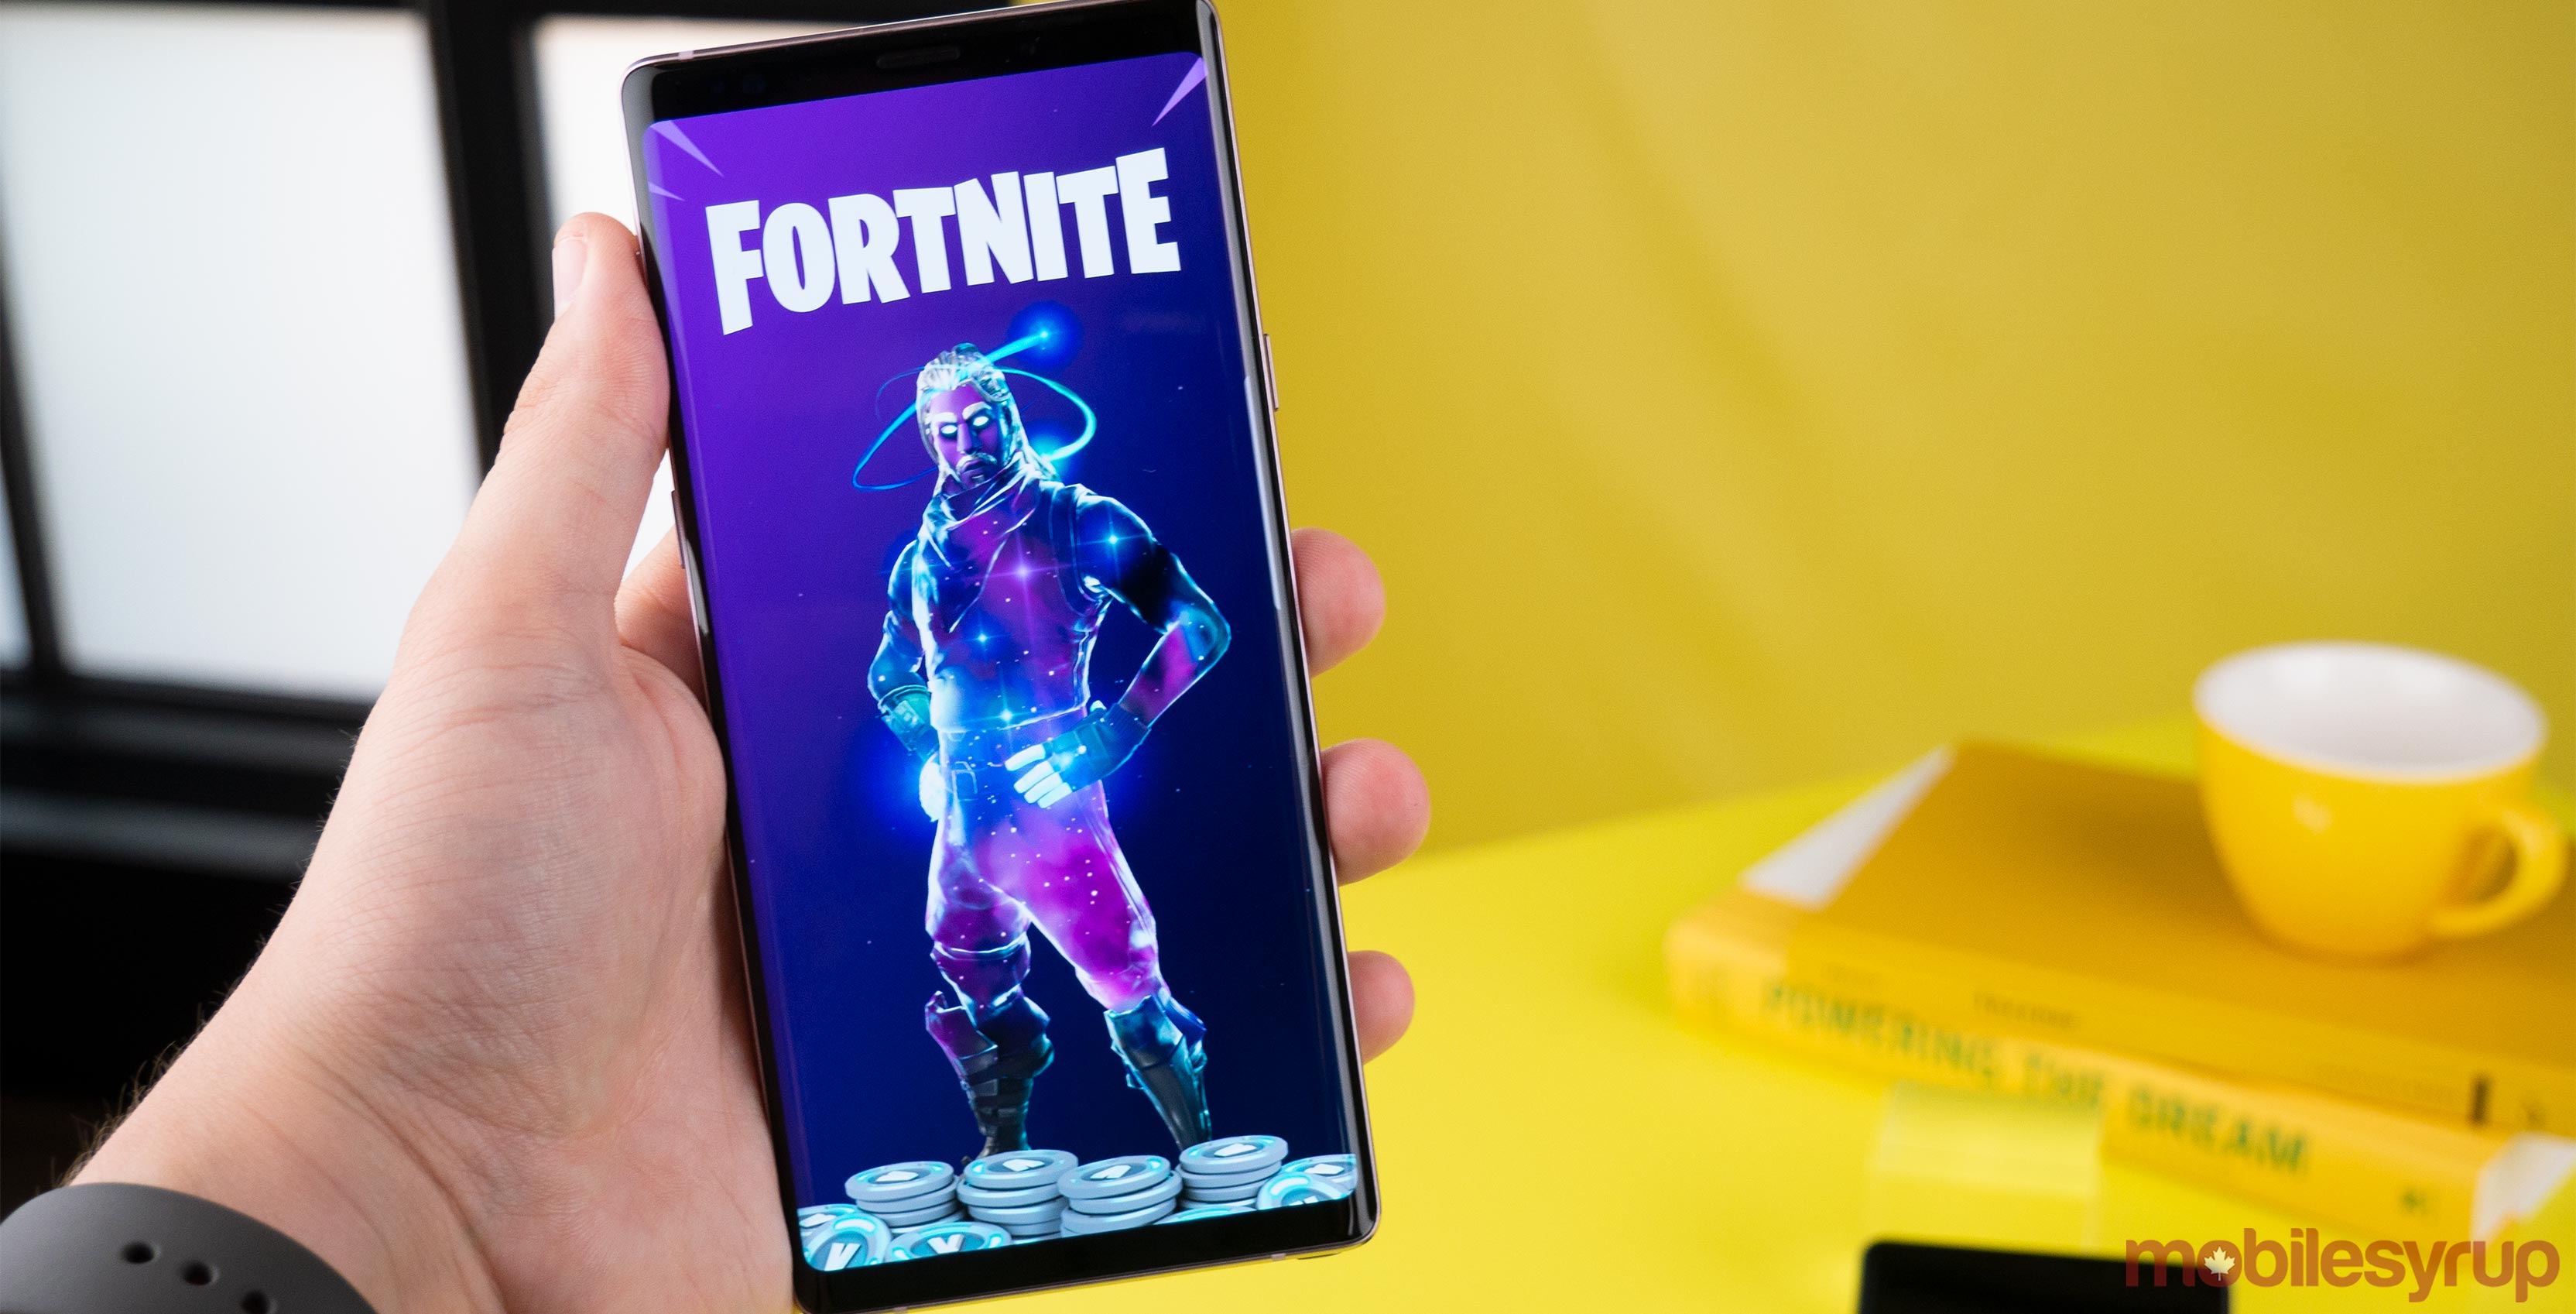 fortnite s long awaited android version has finally launched on samsung mobile devices in beta samsung announced at its unpacked note 9 event in new york - beta fortnite mobile